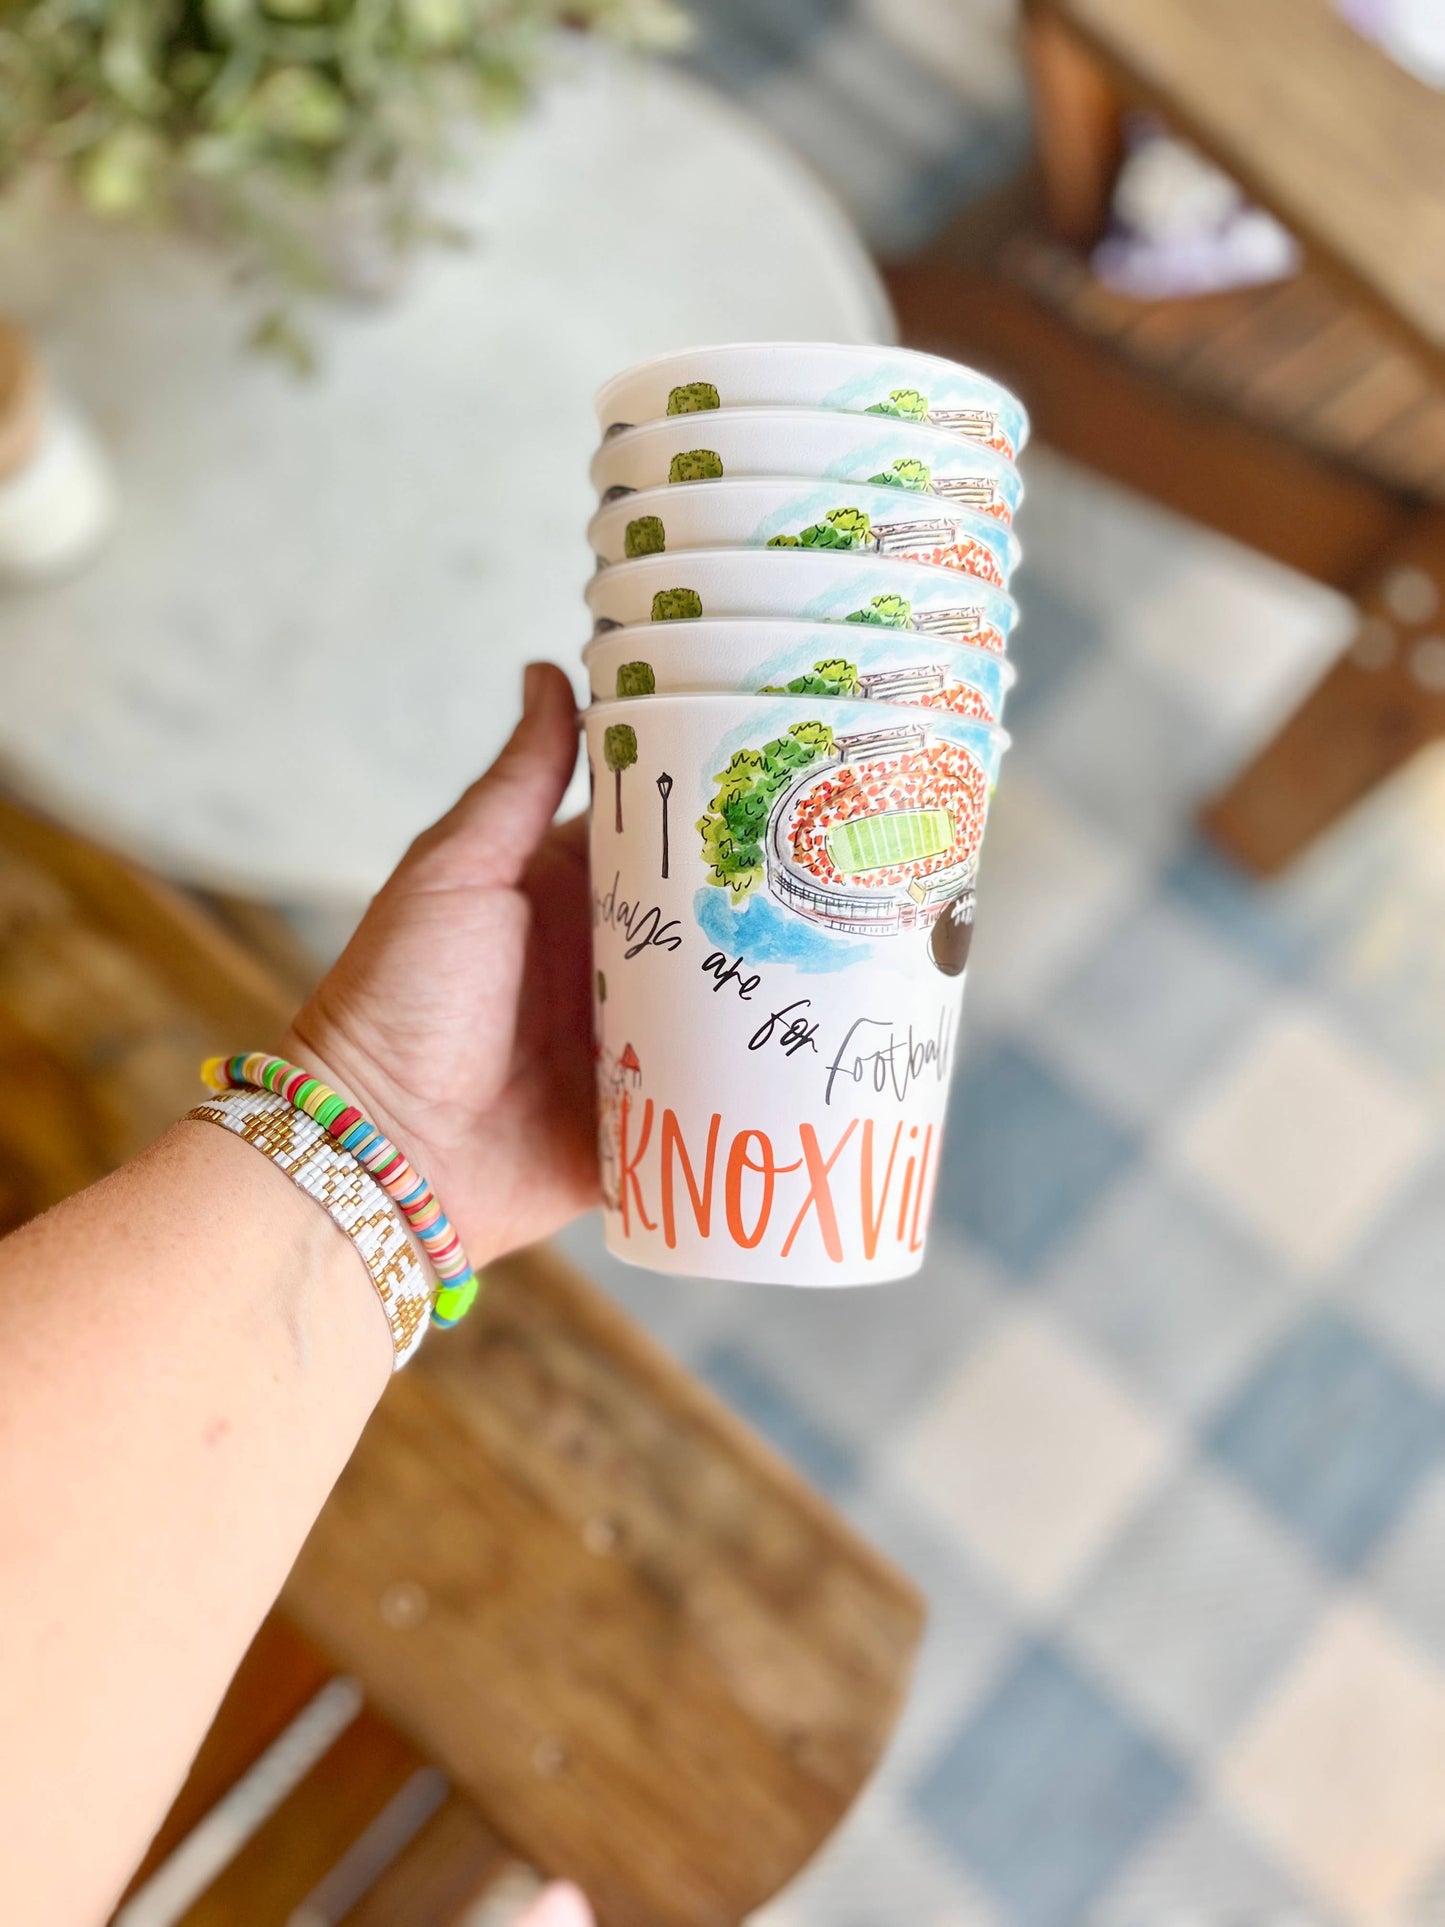 Knoxville Reusable Cups, gifts, collegiate games, alumni: Unwrapped